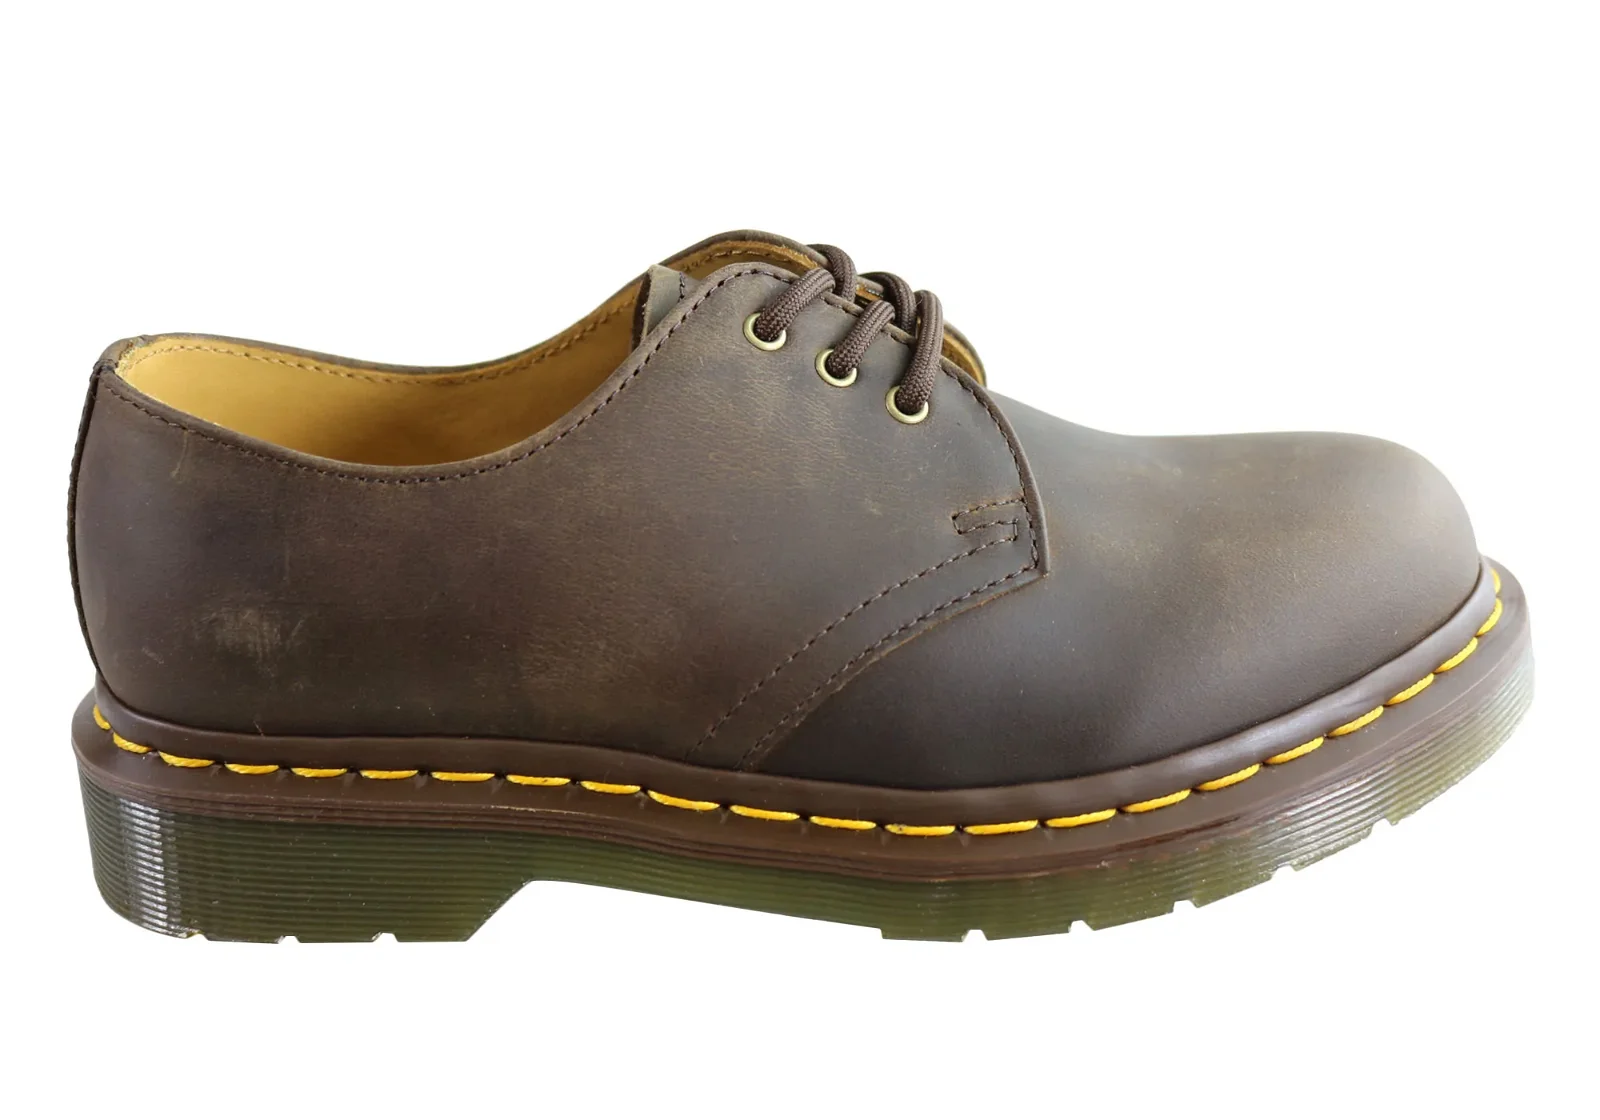 Image of Dr Martens 1461 Gaucho Crazy Horse Lace Up Comfortable Unisex Shoes